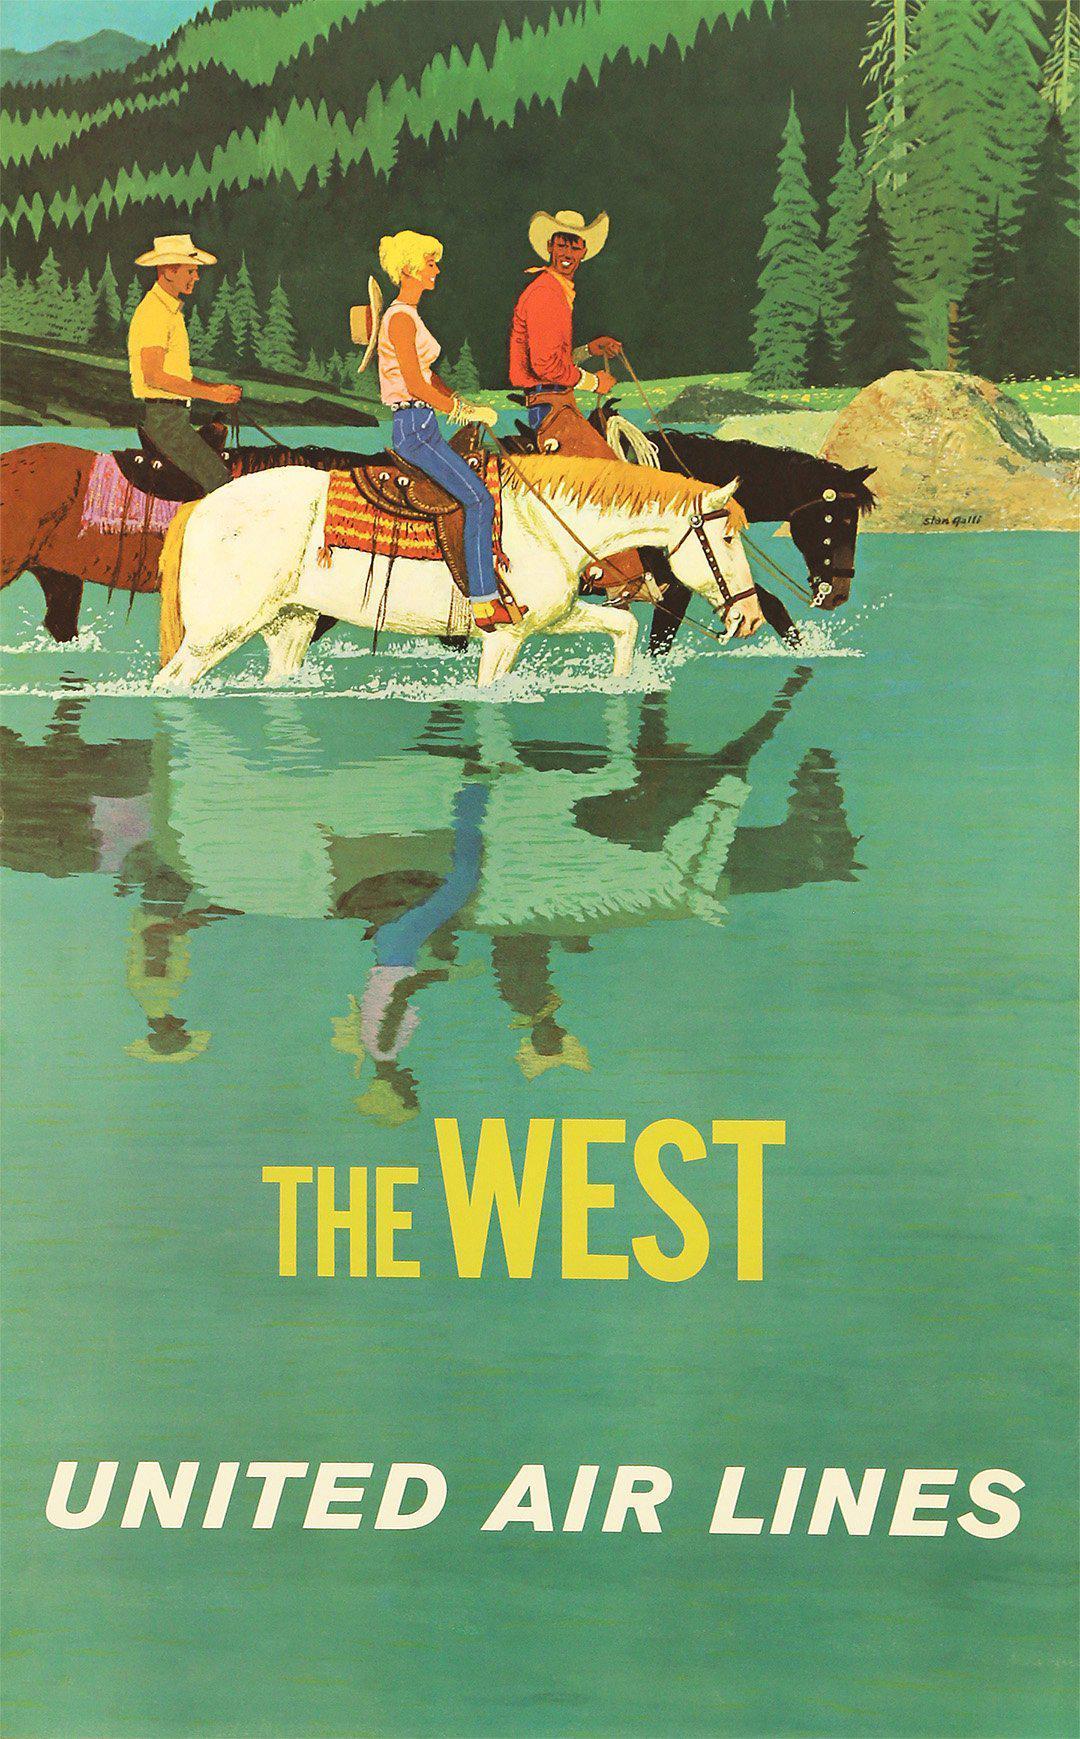 Original Vintage United Air Lines Poster The West by Stan Galli c1960